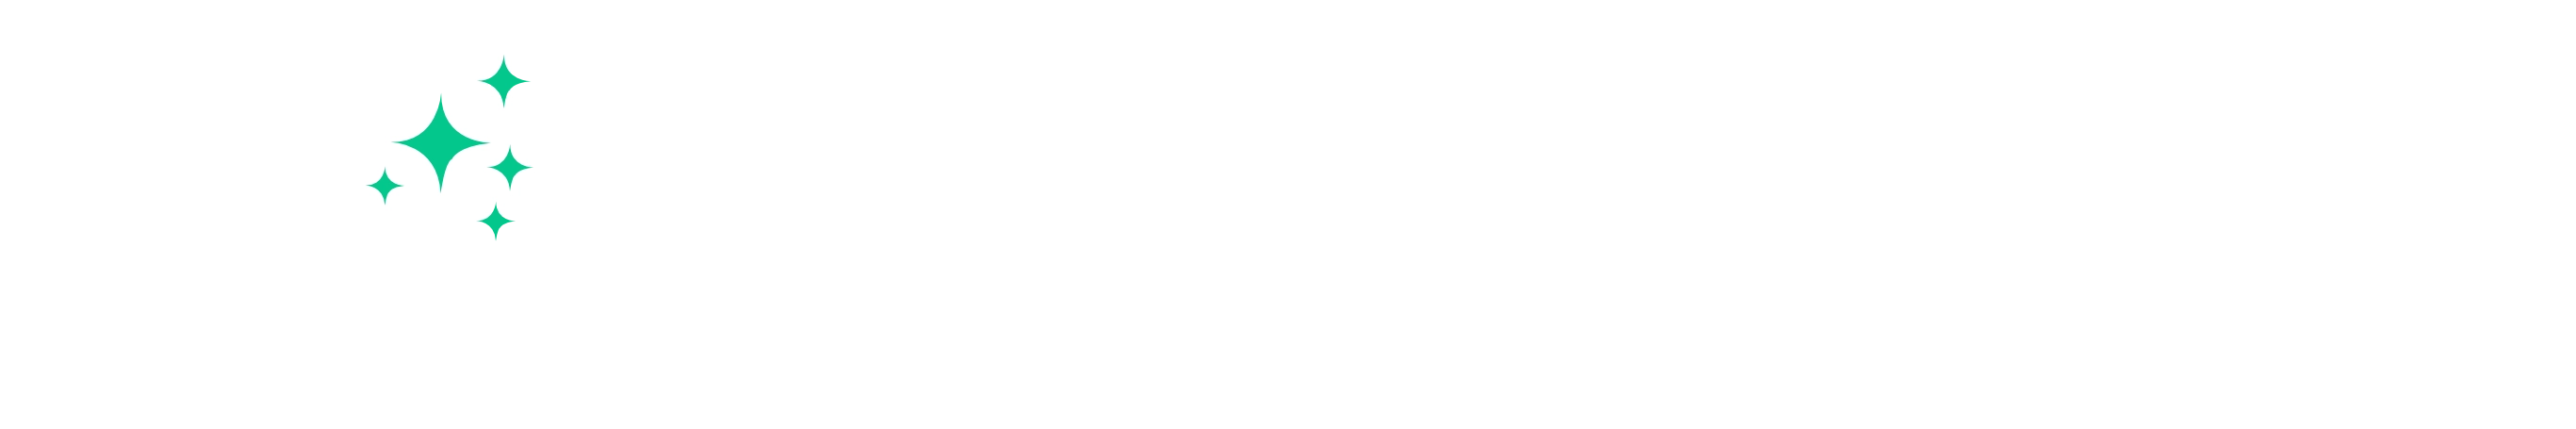 celaning-services.sk 